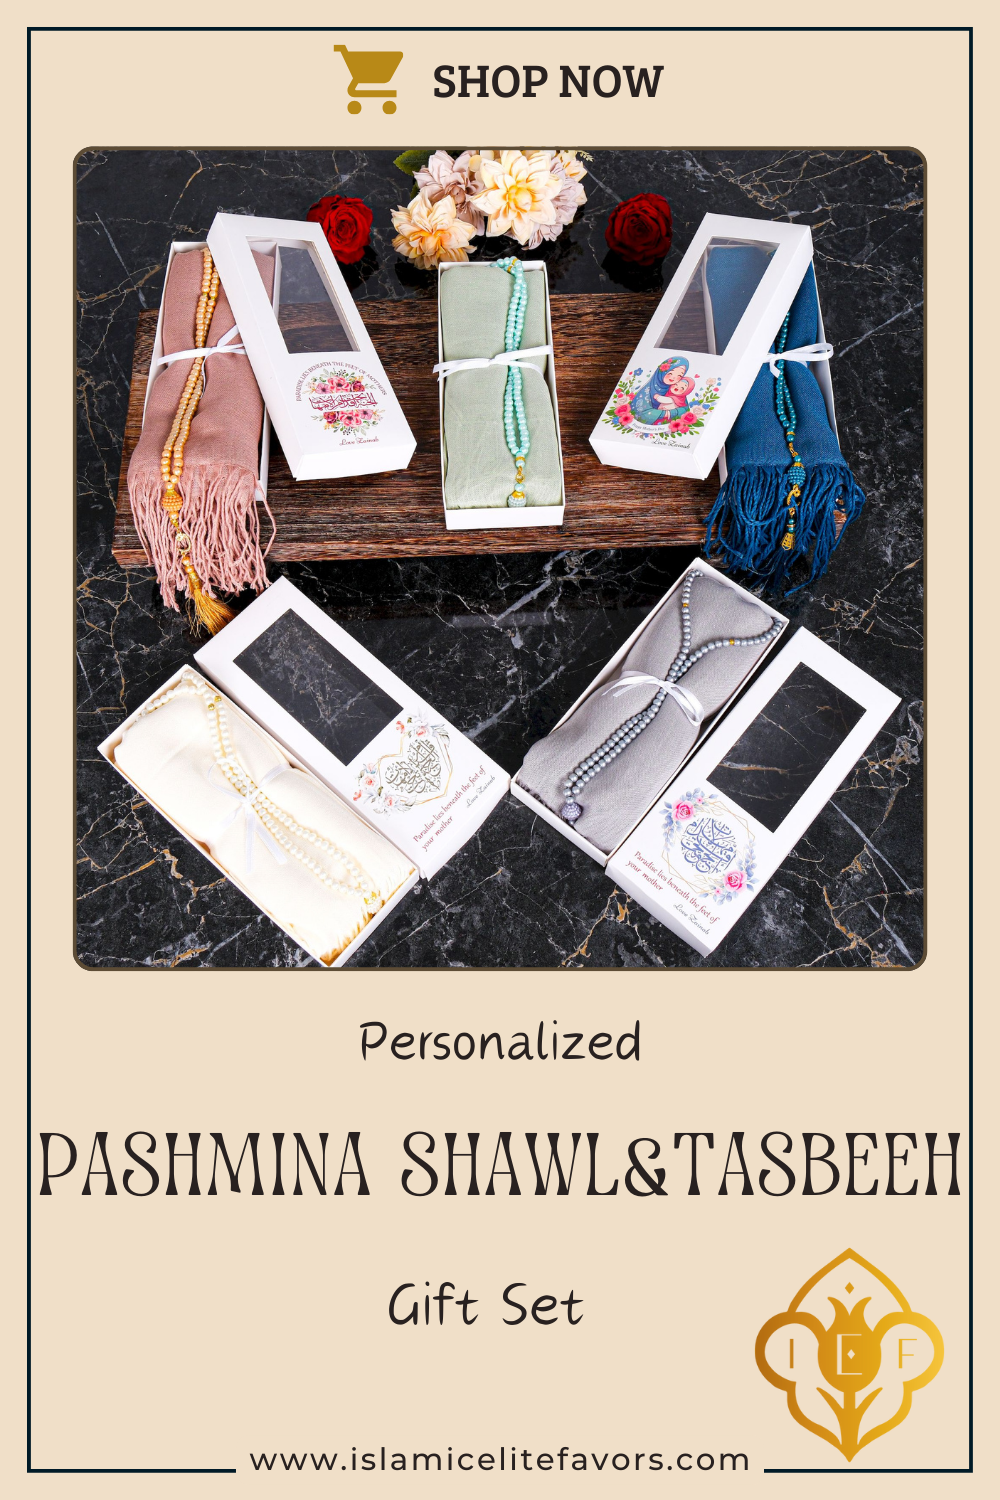 Personalized Pashmina Shawl Scarf Tasbeeh Mother's Day Gift Set - Islamic Elite Favors is a handmade gift shop offering a wide variety of unique and personalized gifts for all occasions. Whether you're looking for the perfect Ramadan, Eid, Hajj, wedding gift or something special for a birthday, baby shower or anniversary, we have something for everyone. High quality, made with love.